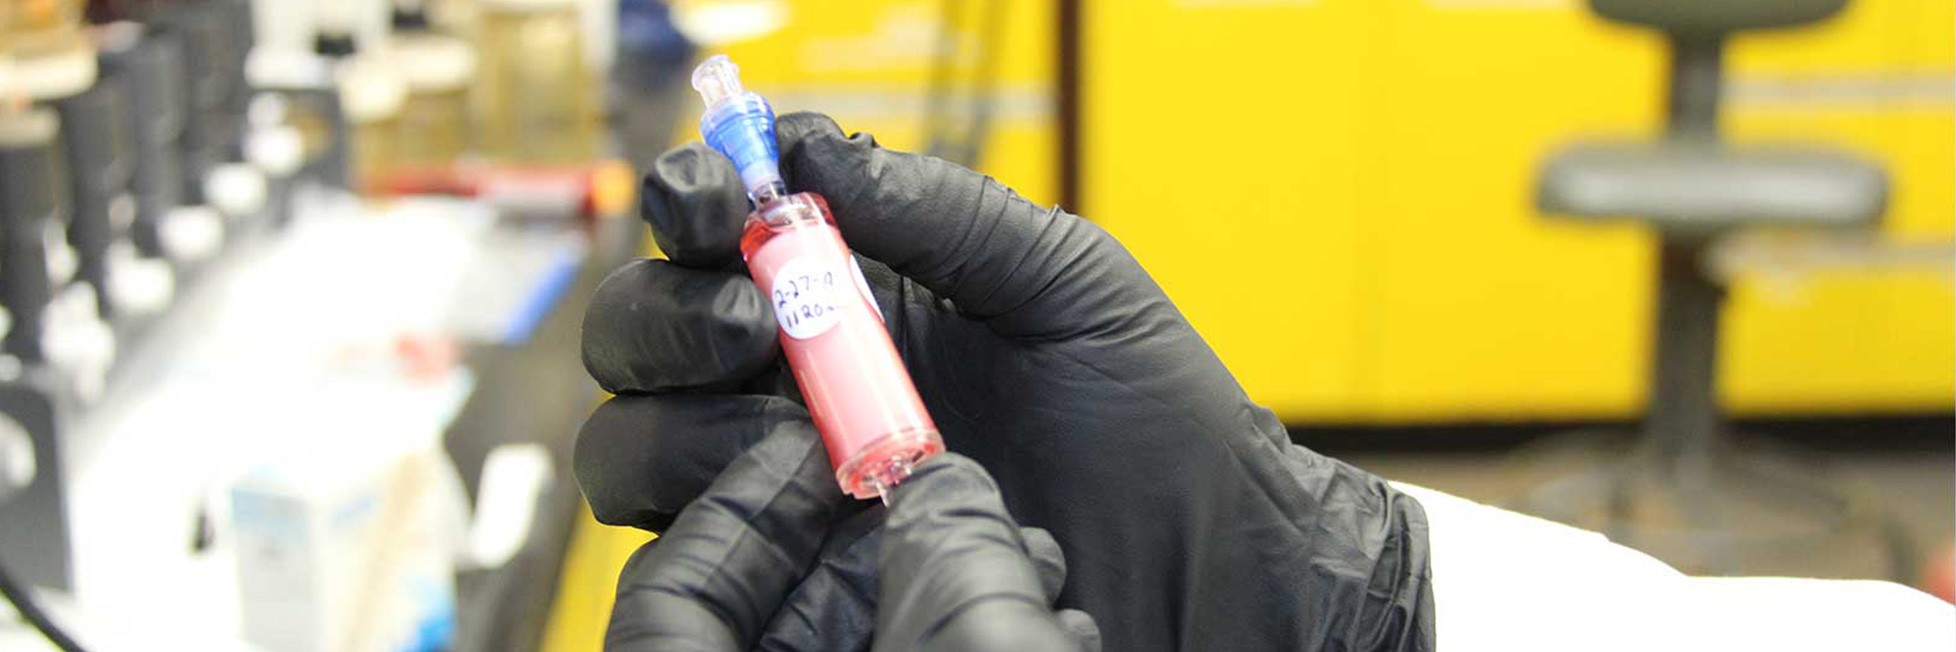 omics researchers in the ocean chemistry & ecosystems division measure DNA, RNA & protein, to understand ecosystem health. Image depicts black gloved hands holding A red translucent inline filter.